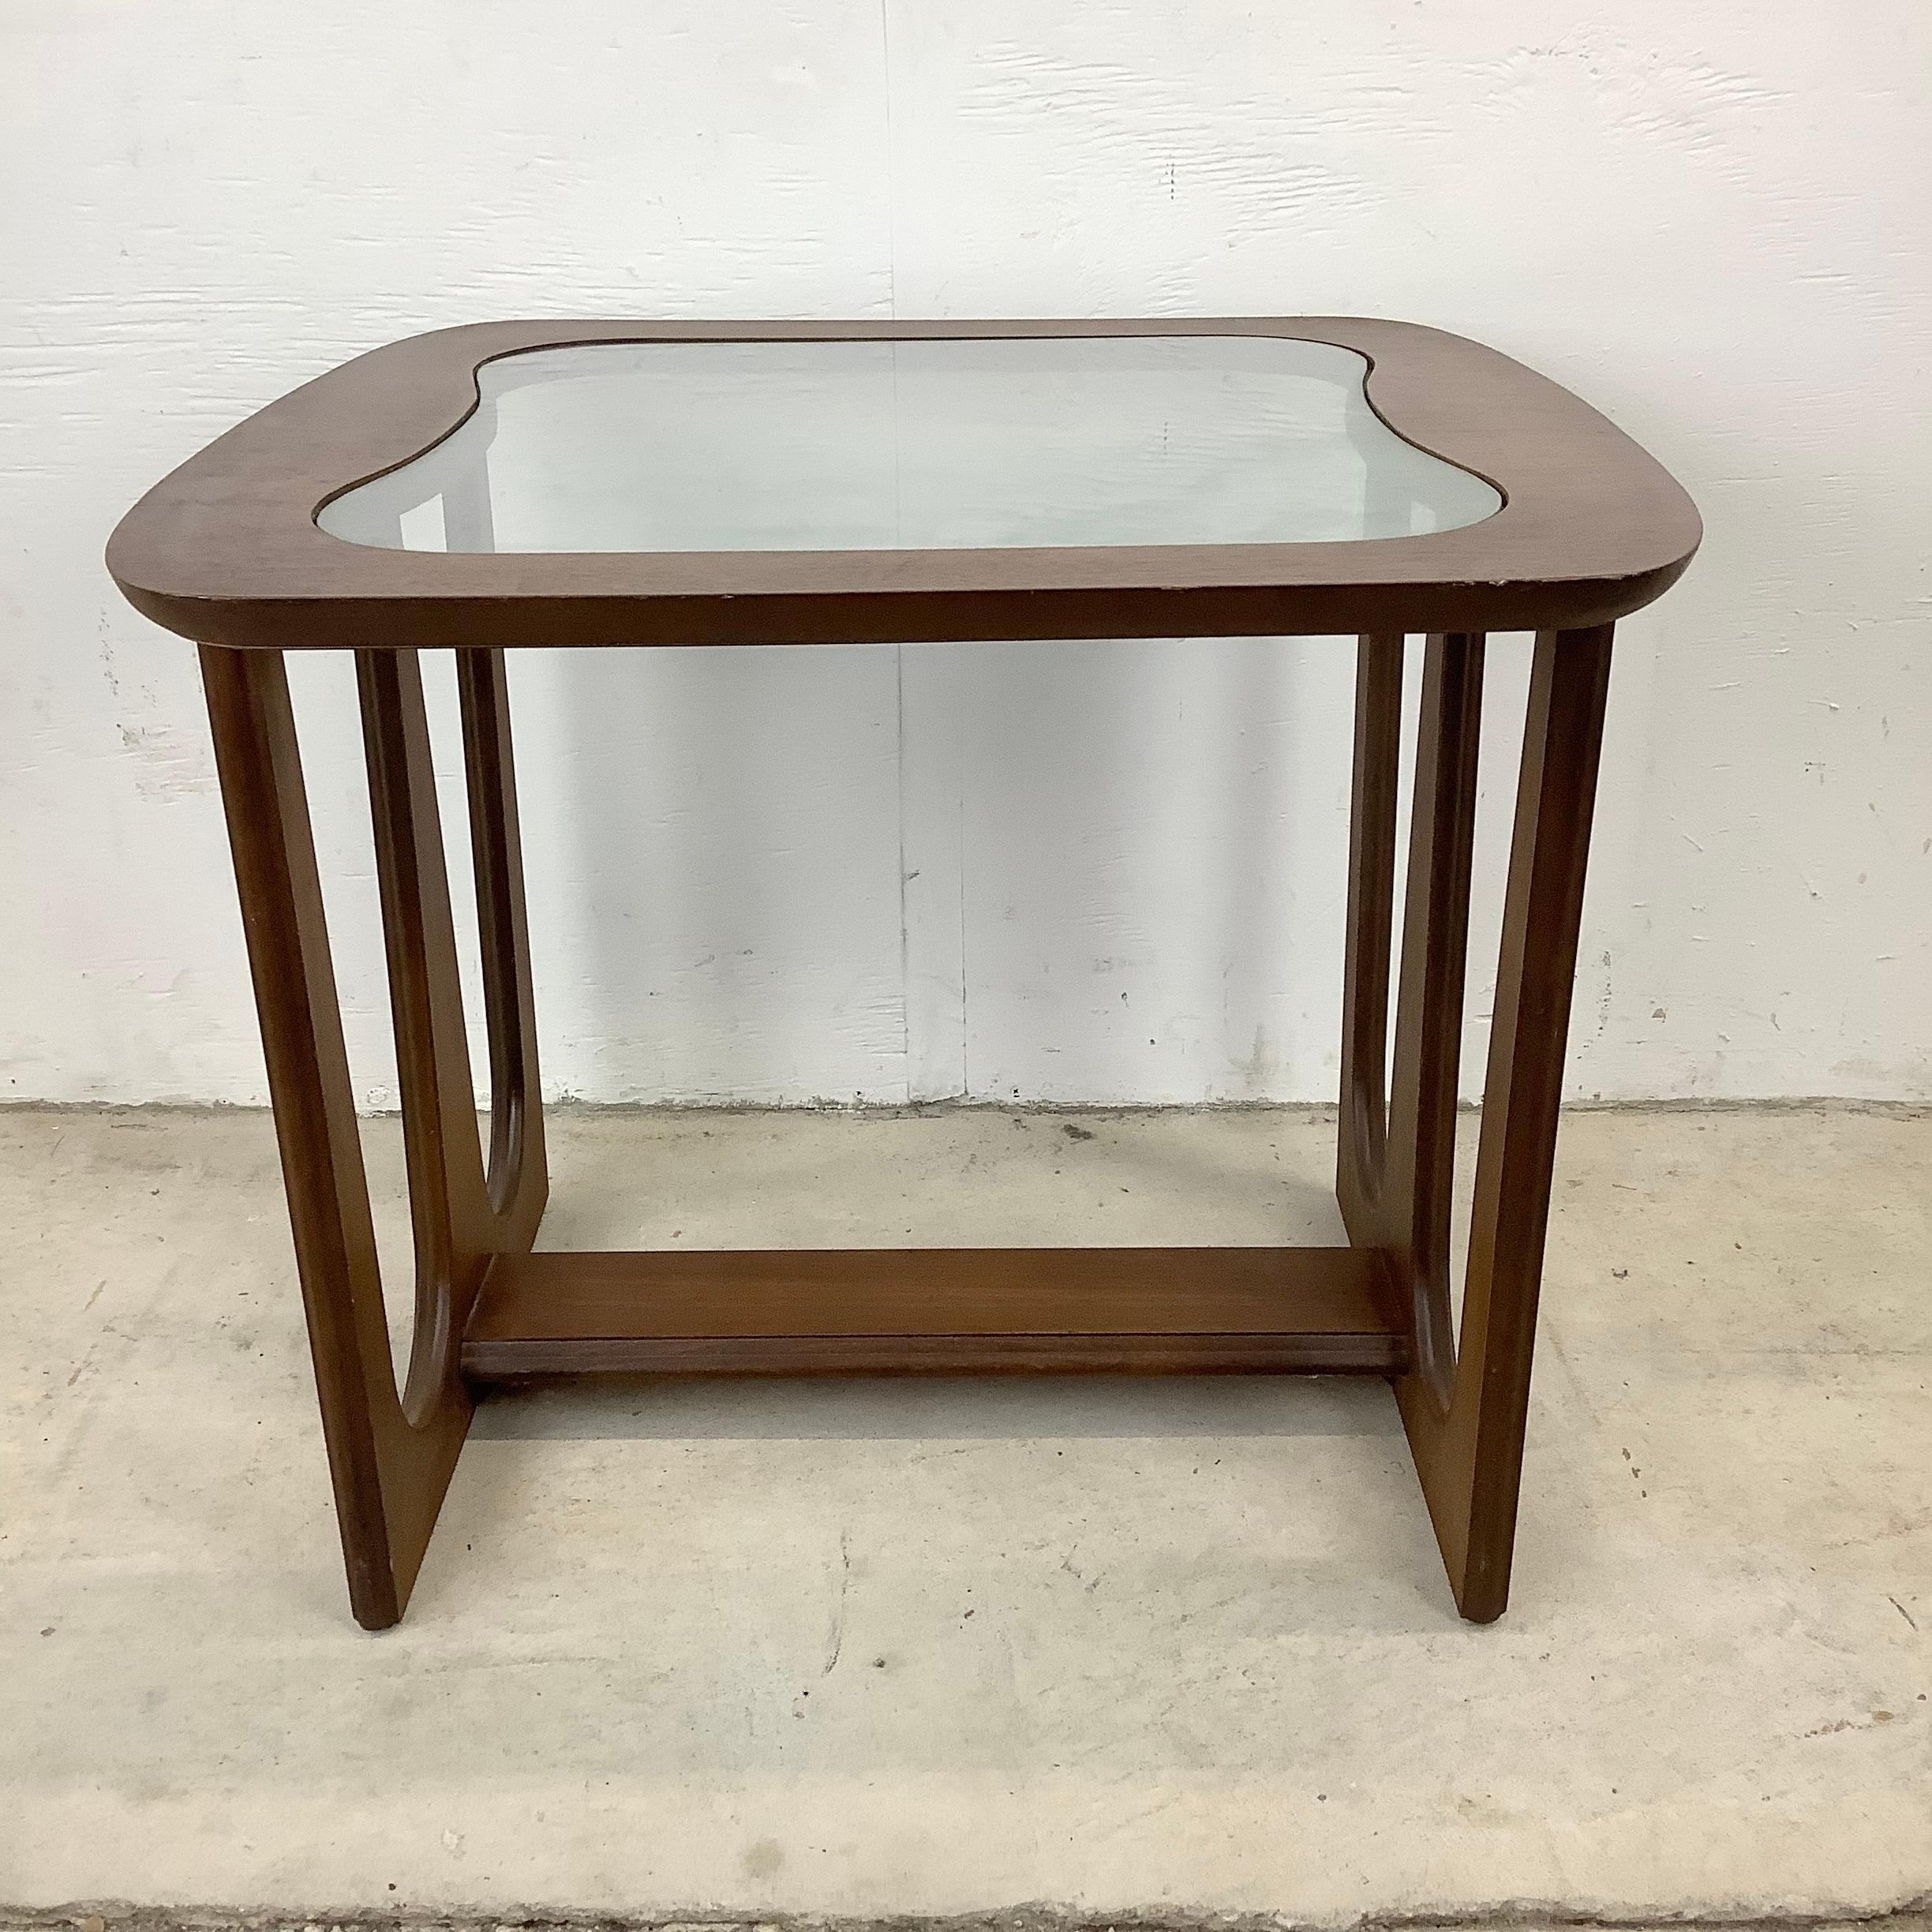 Simple yet stylish mid-century modern side table features a striking sculptural wood base with a rounded edge glass top. Perfect end table as a seating side table or lamp table, adding vintage modern style in a subtle mcm package.

Dimensions: 24w